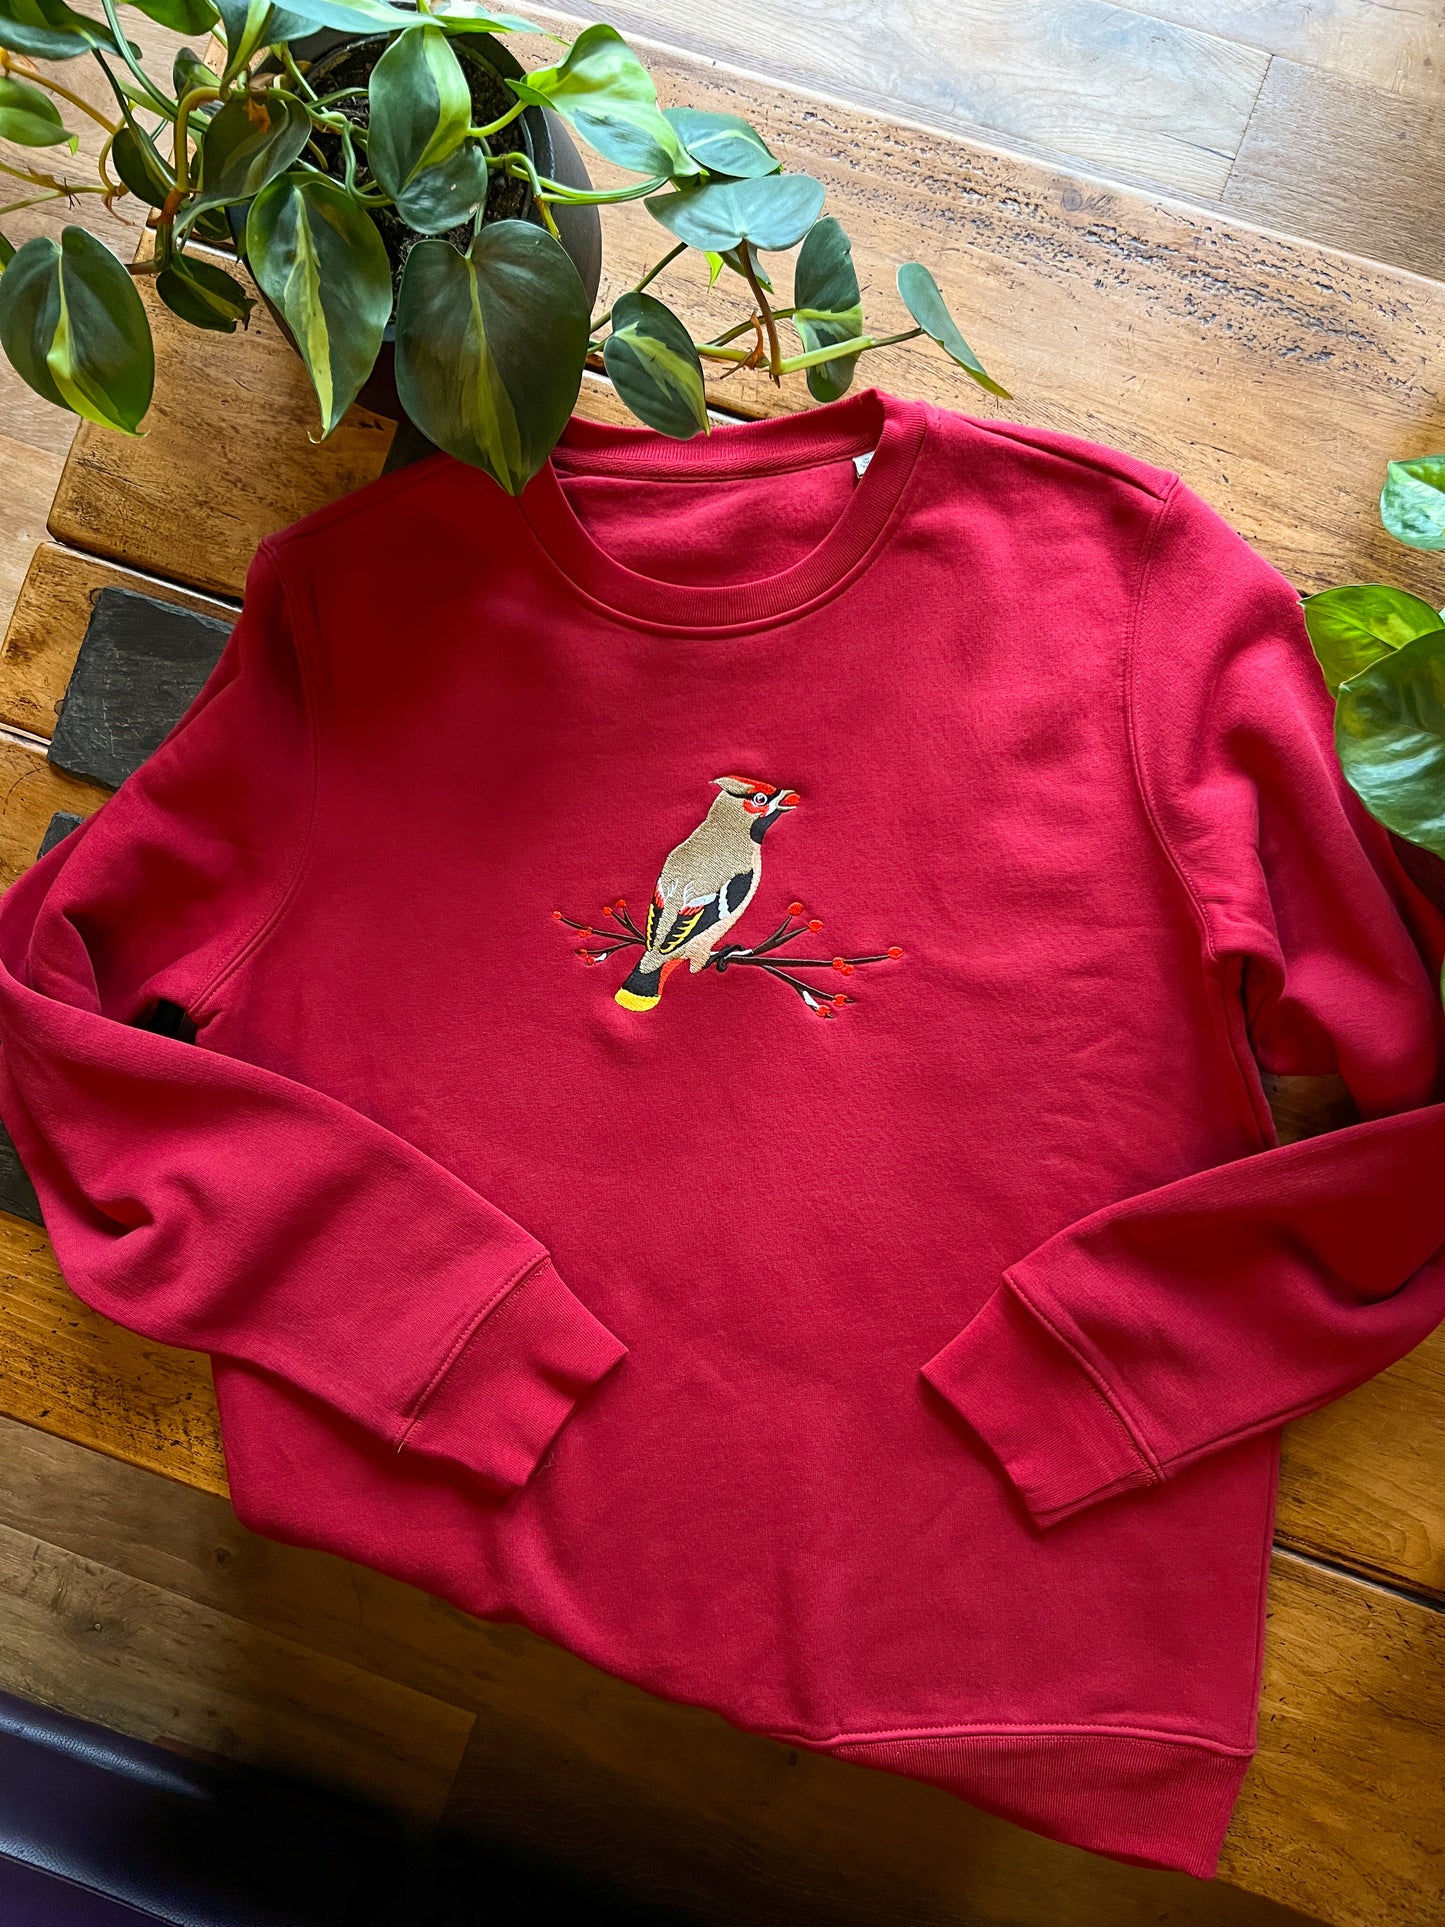 Waxwing Embroidered Cherry Red Sweatshirt